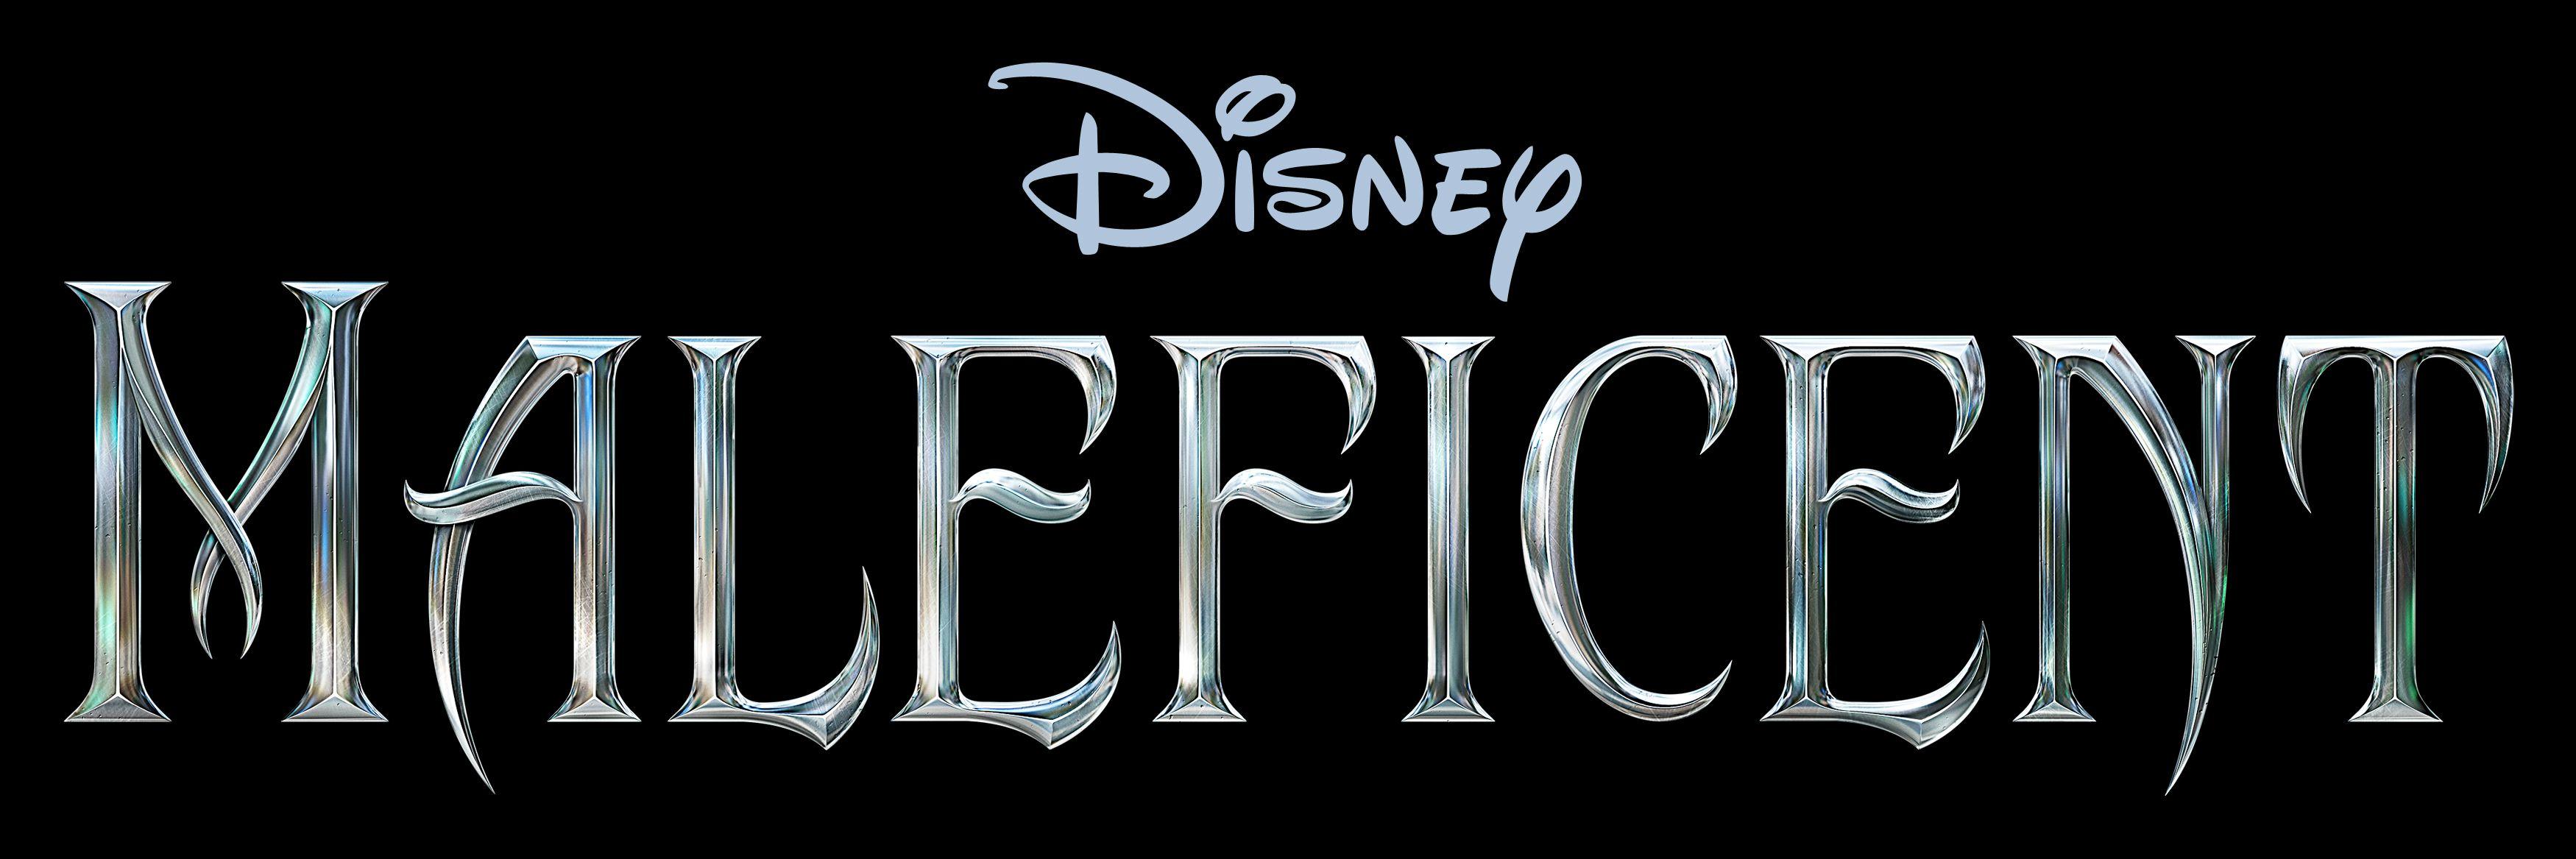 Disney Movie Logo - TOMORROWLAND, MALEFICENT, MUPPETS MOST WANTED, and SAVING MR. BANKS